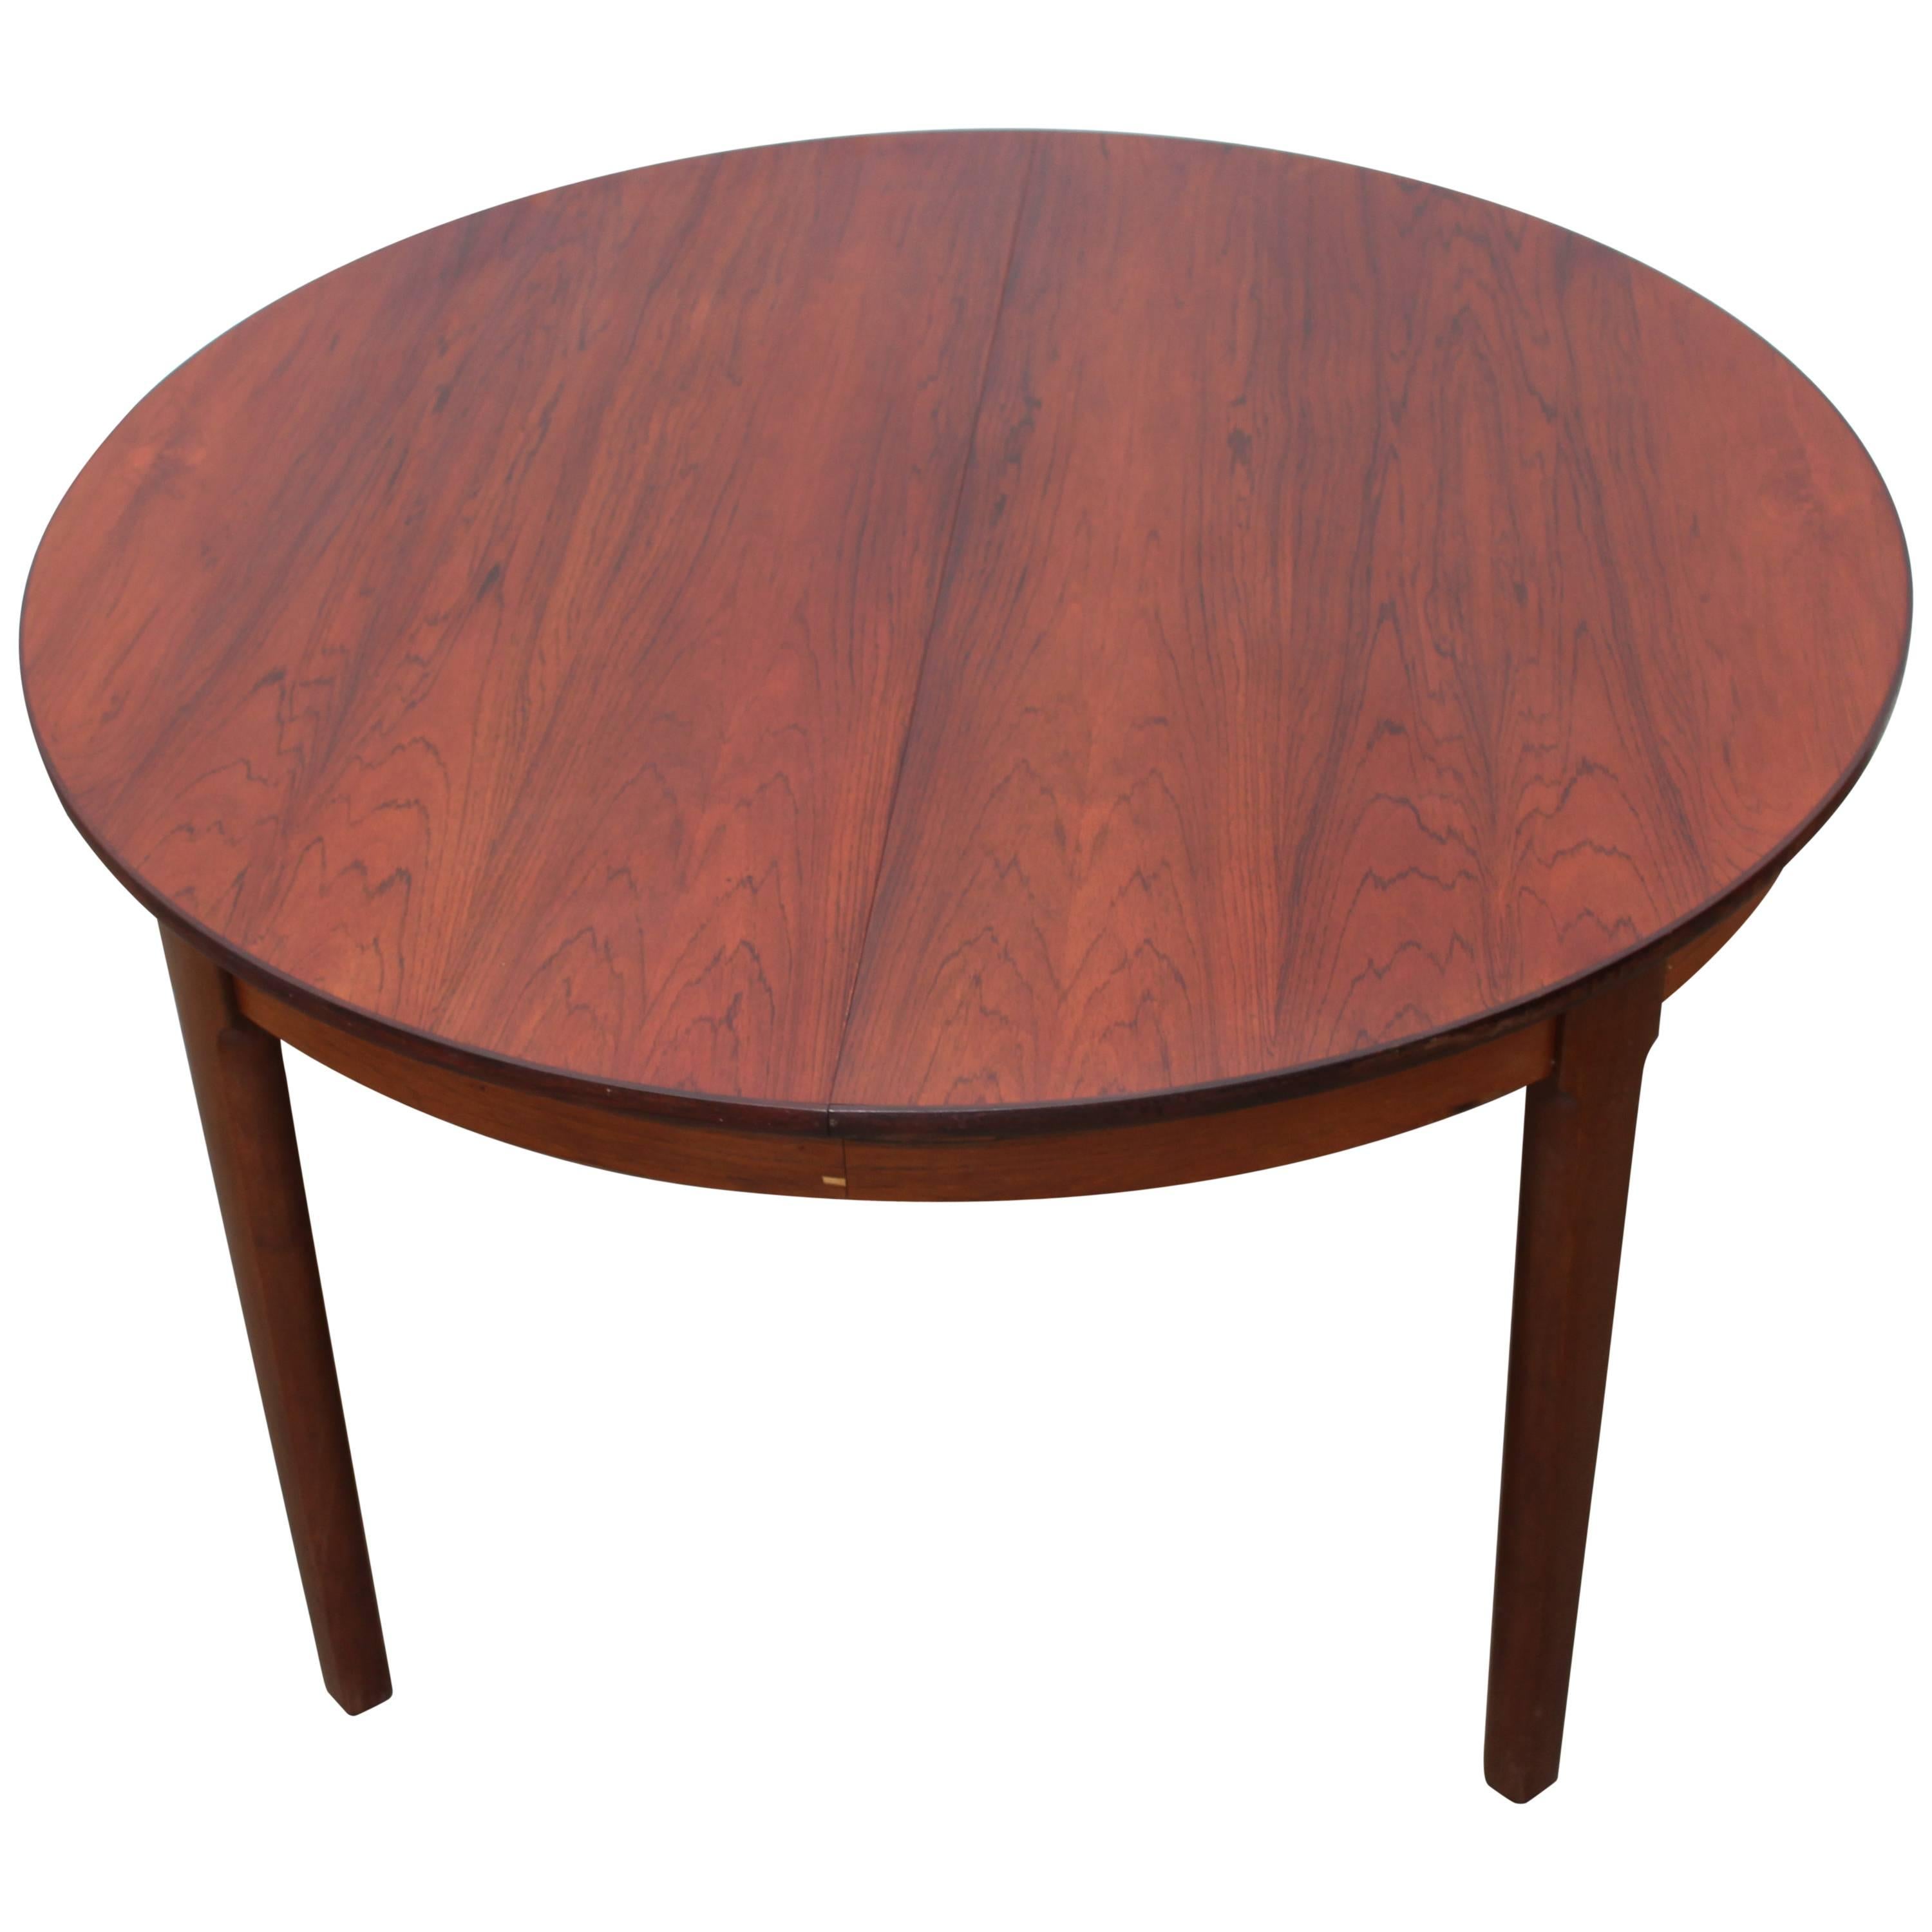 Round Rosewood Dining Table, Scandinavian Modern, circa 1950s For Sale